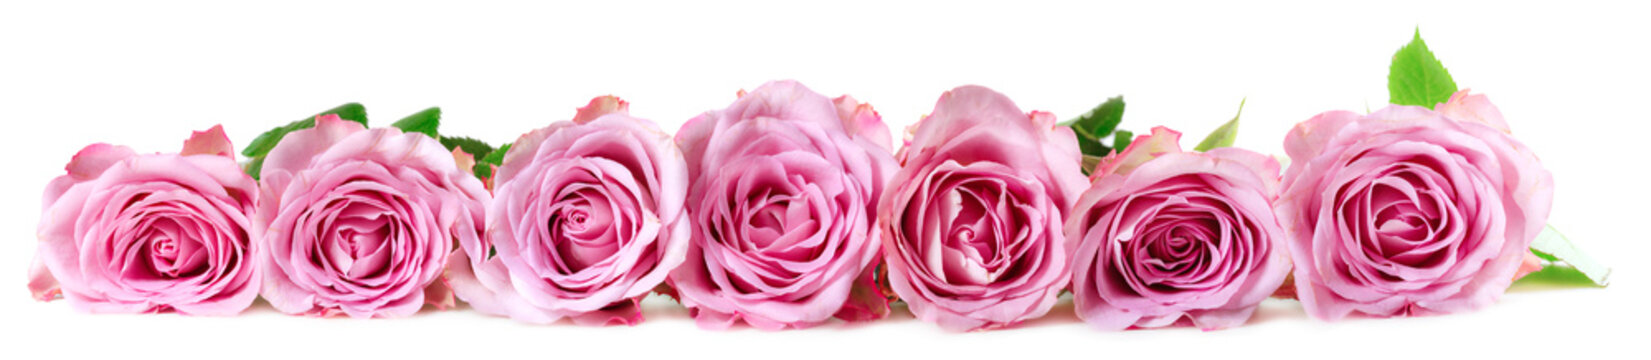 Panoramic image of roses on a white background